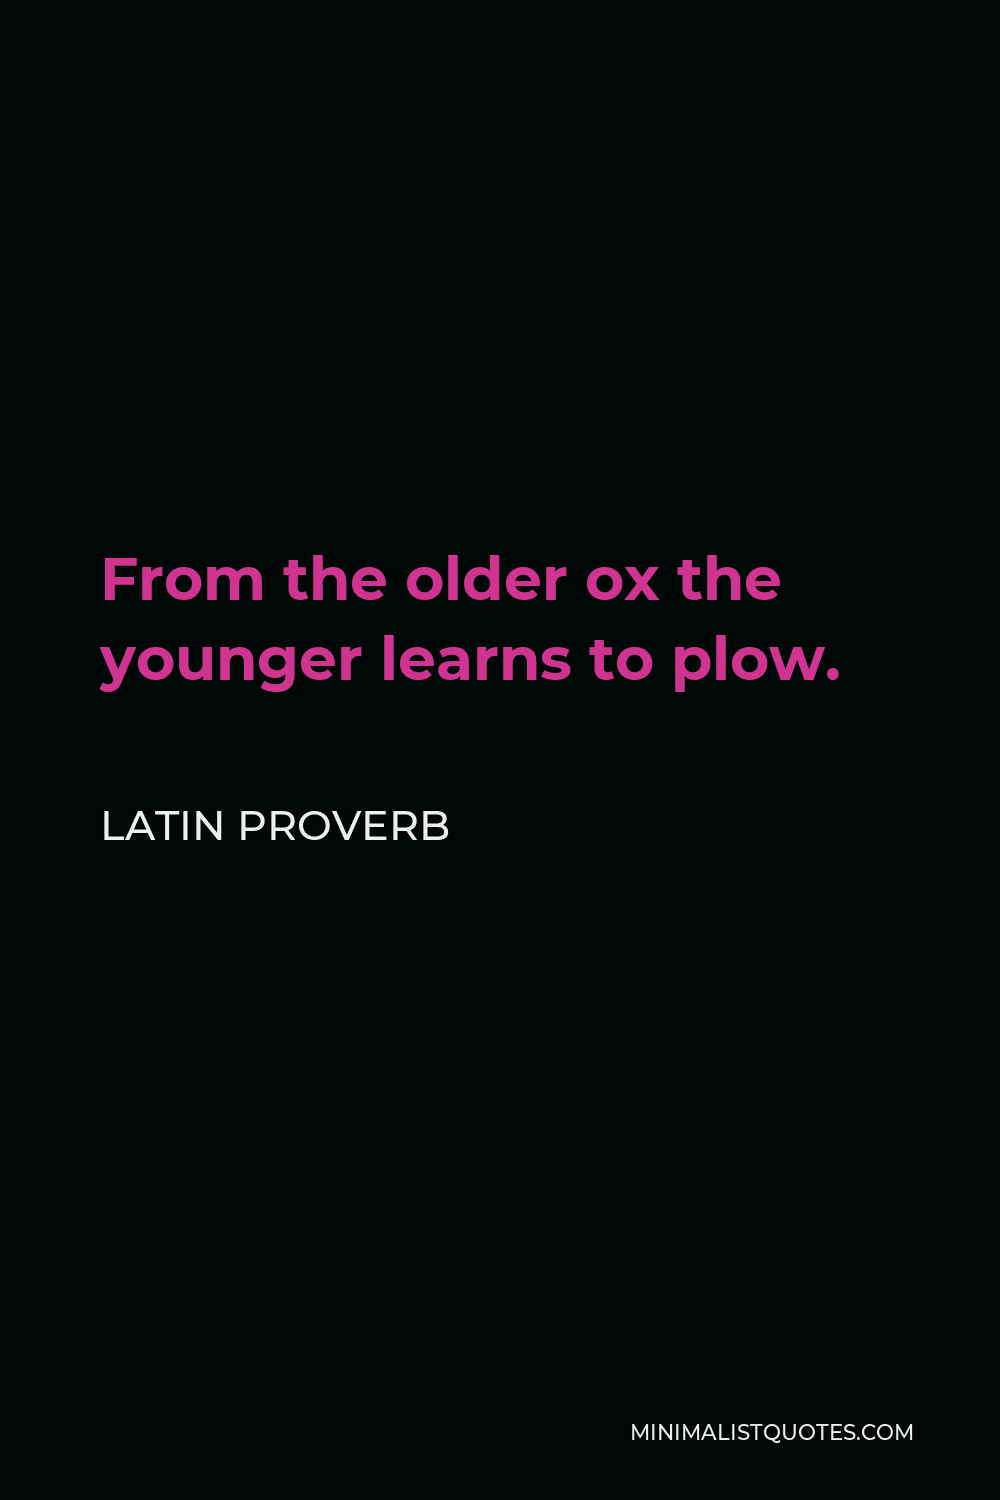 Latin Proverb Quote - From the older ox the younger learns to plow.